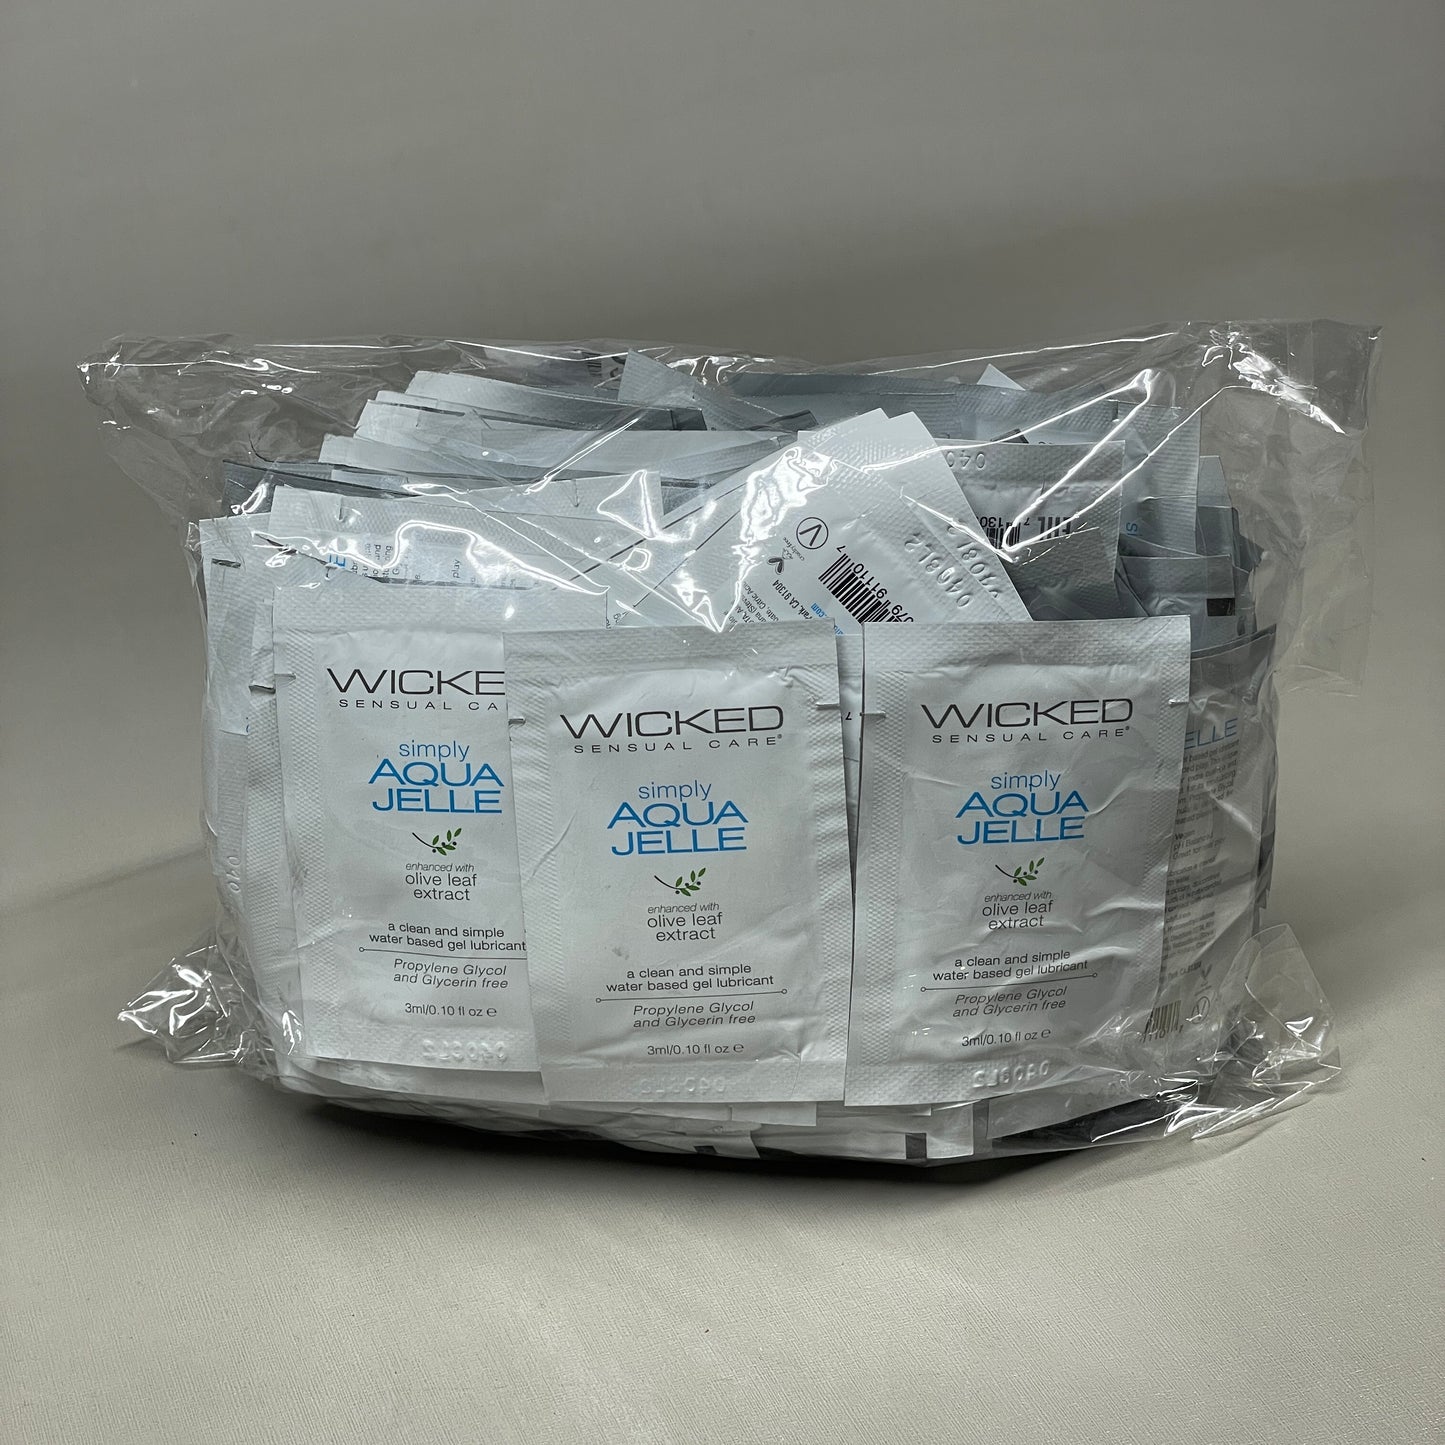 WICKED SENSUAL CARE 144-PACK Simply Aqua Jelle Clean & Simple Water Based Gel Lubricant .1 oz (New)